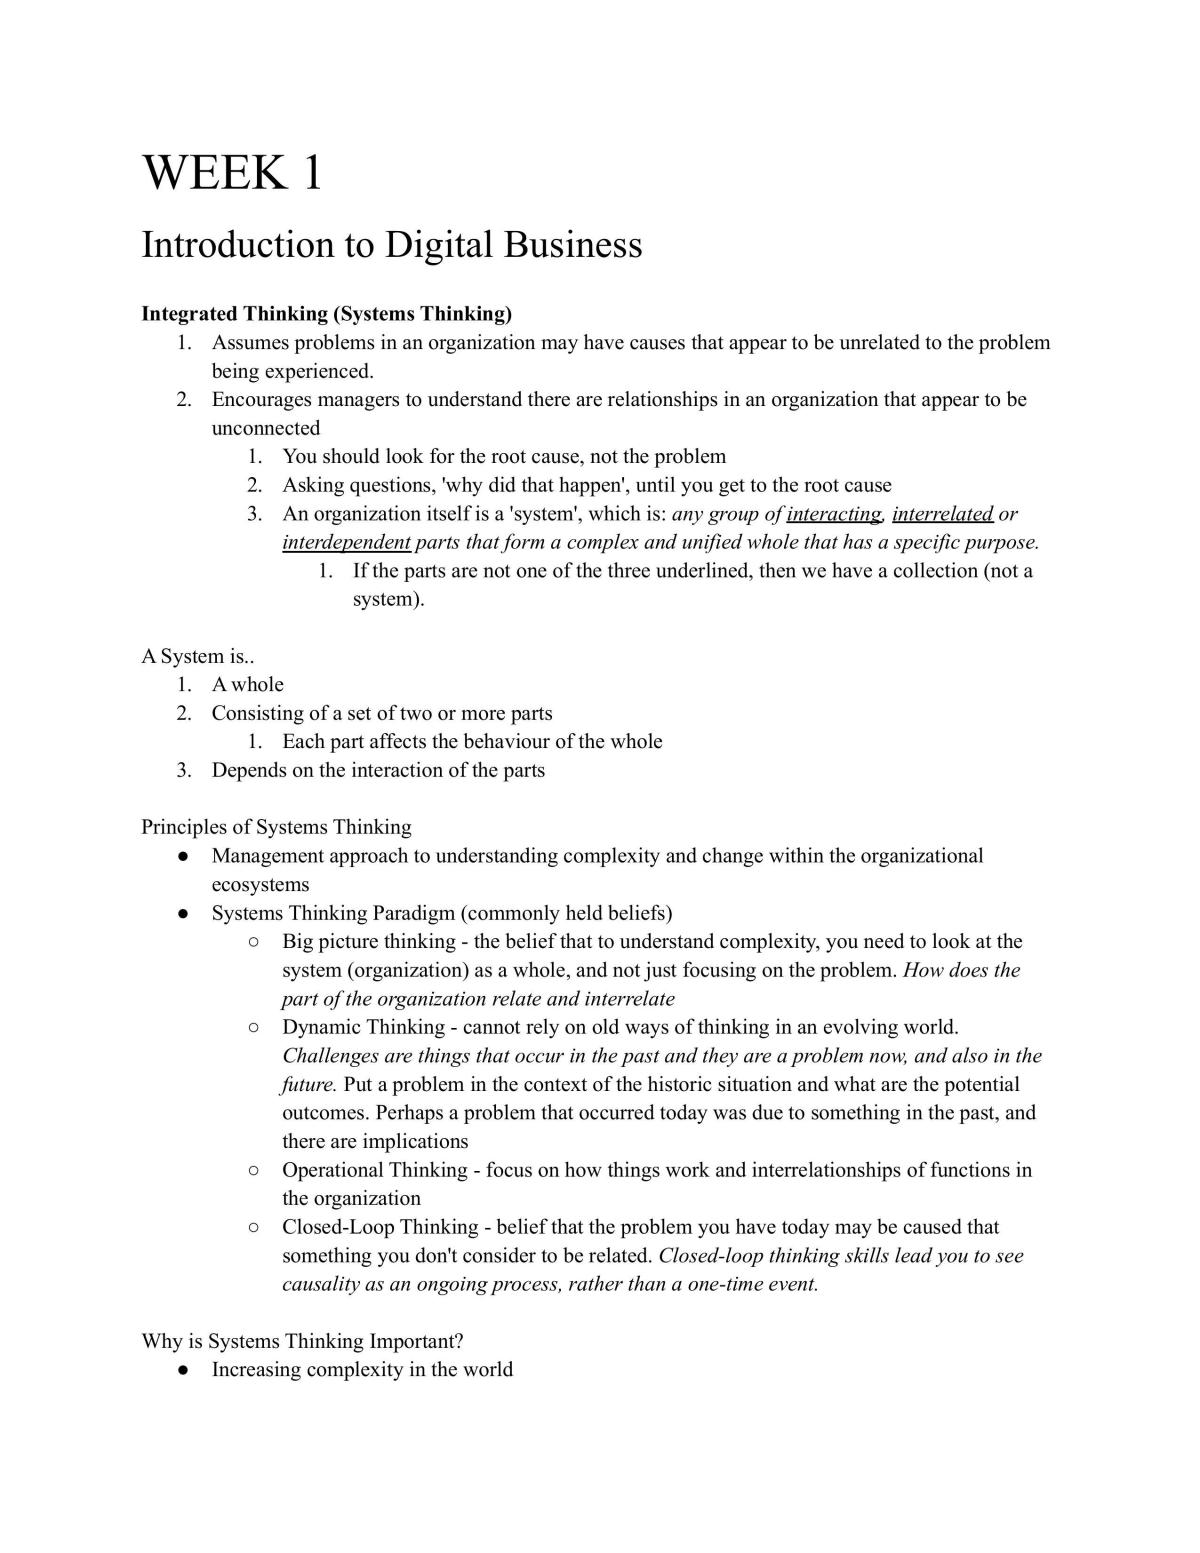 MGSYS101 - Integrated Thinking - Digital Business and Supply Chain Management FULL NOTES - Page 2